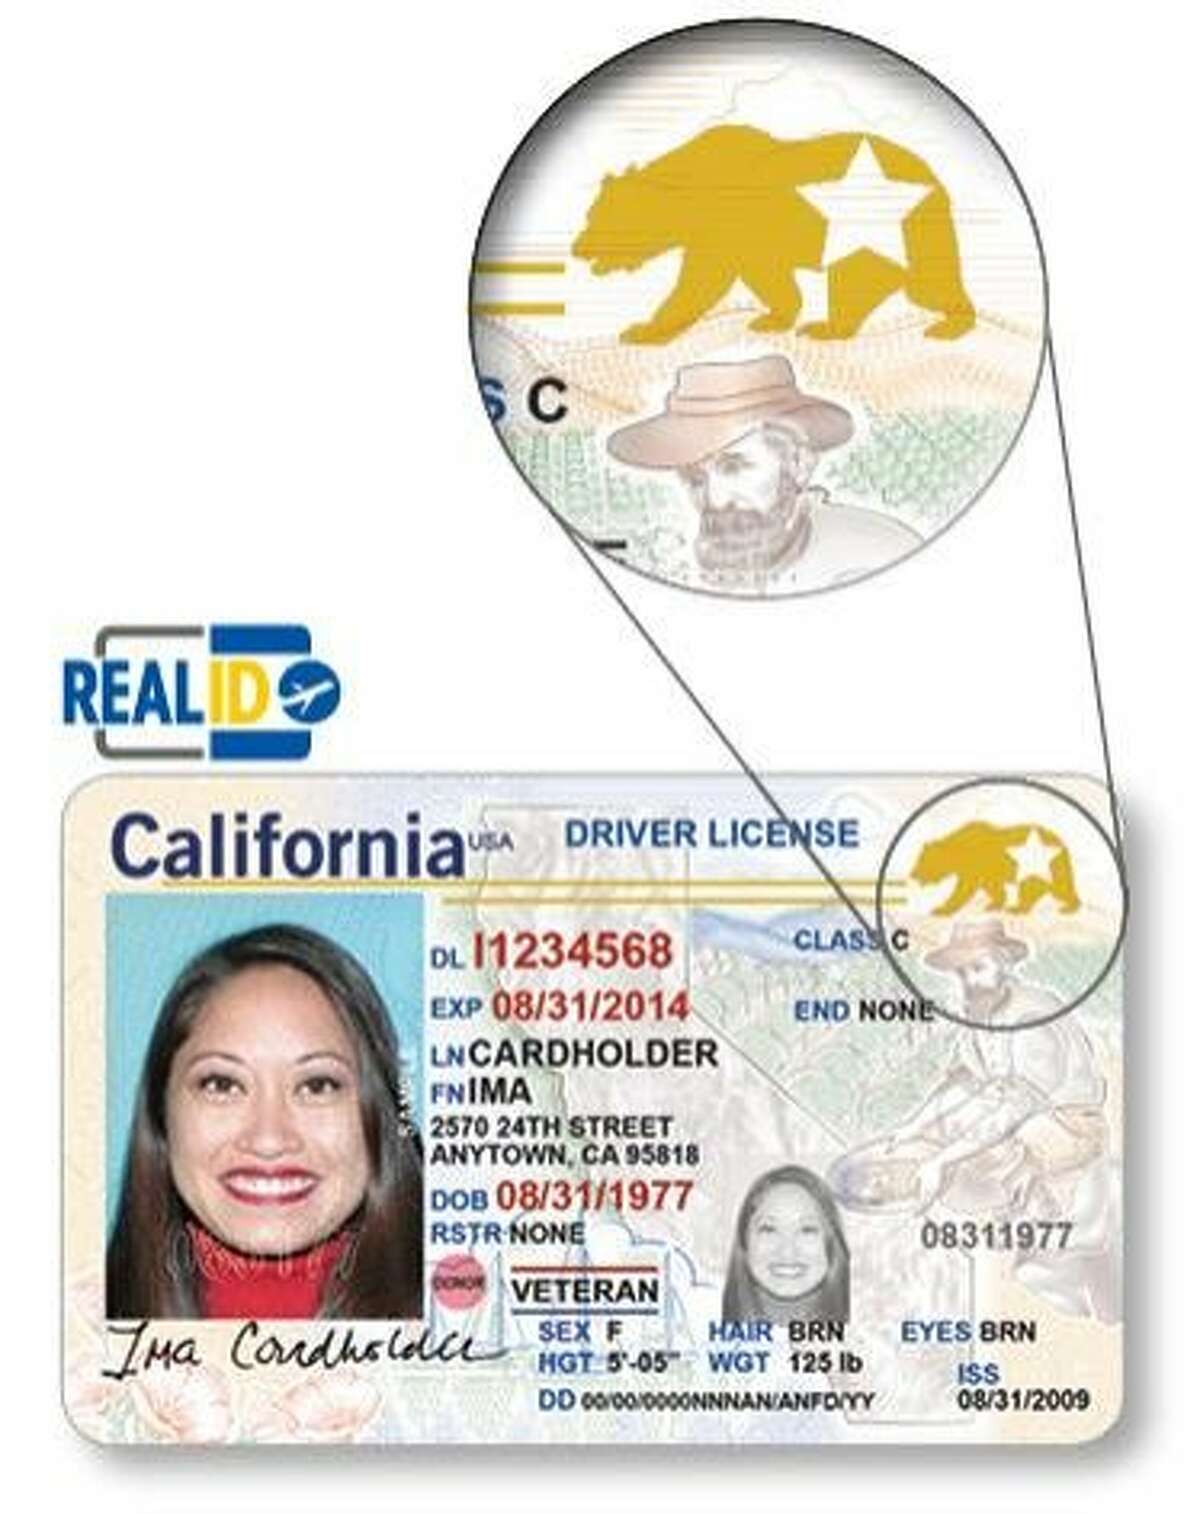 Sample California driver license that meets federal requirements to be a "Real ID."